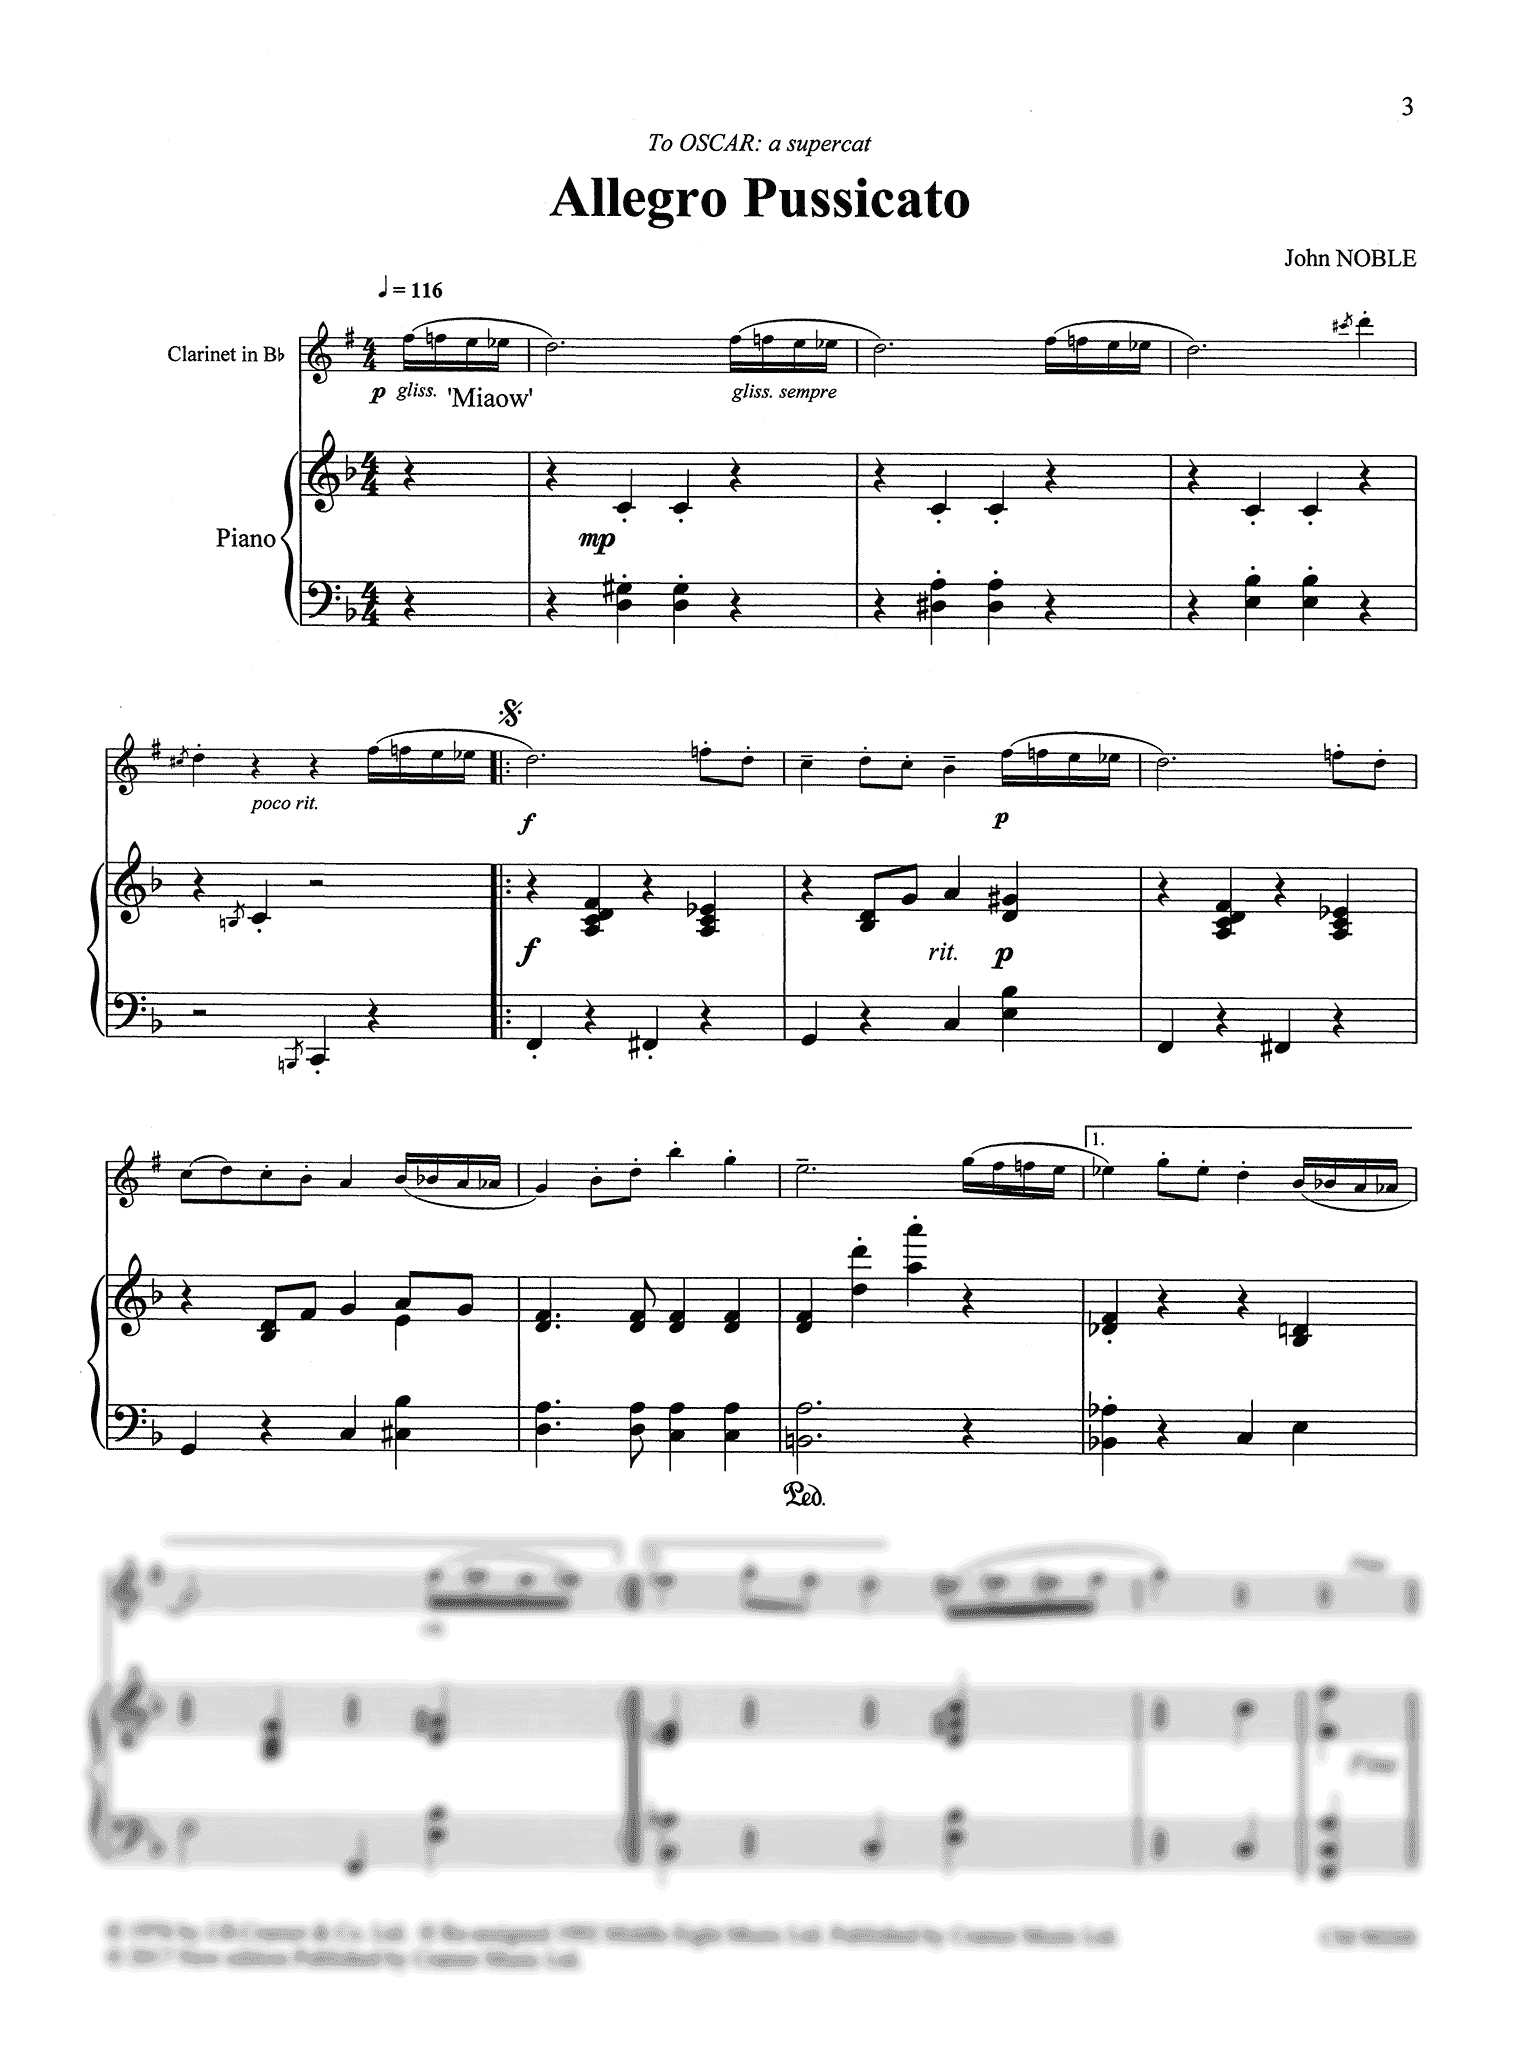 John Noble Cats Suite clarinet and piano - Movement 1